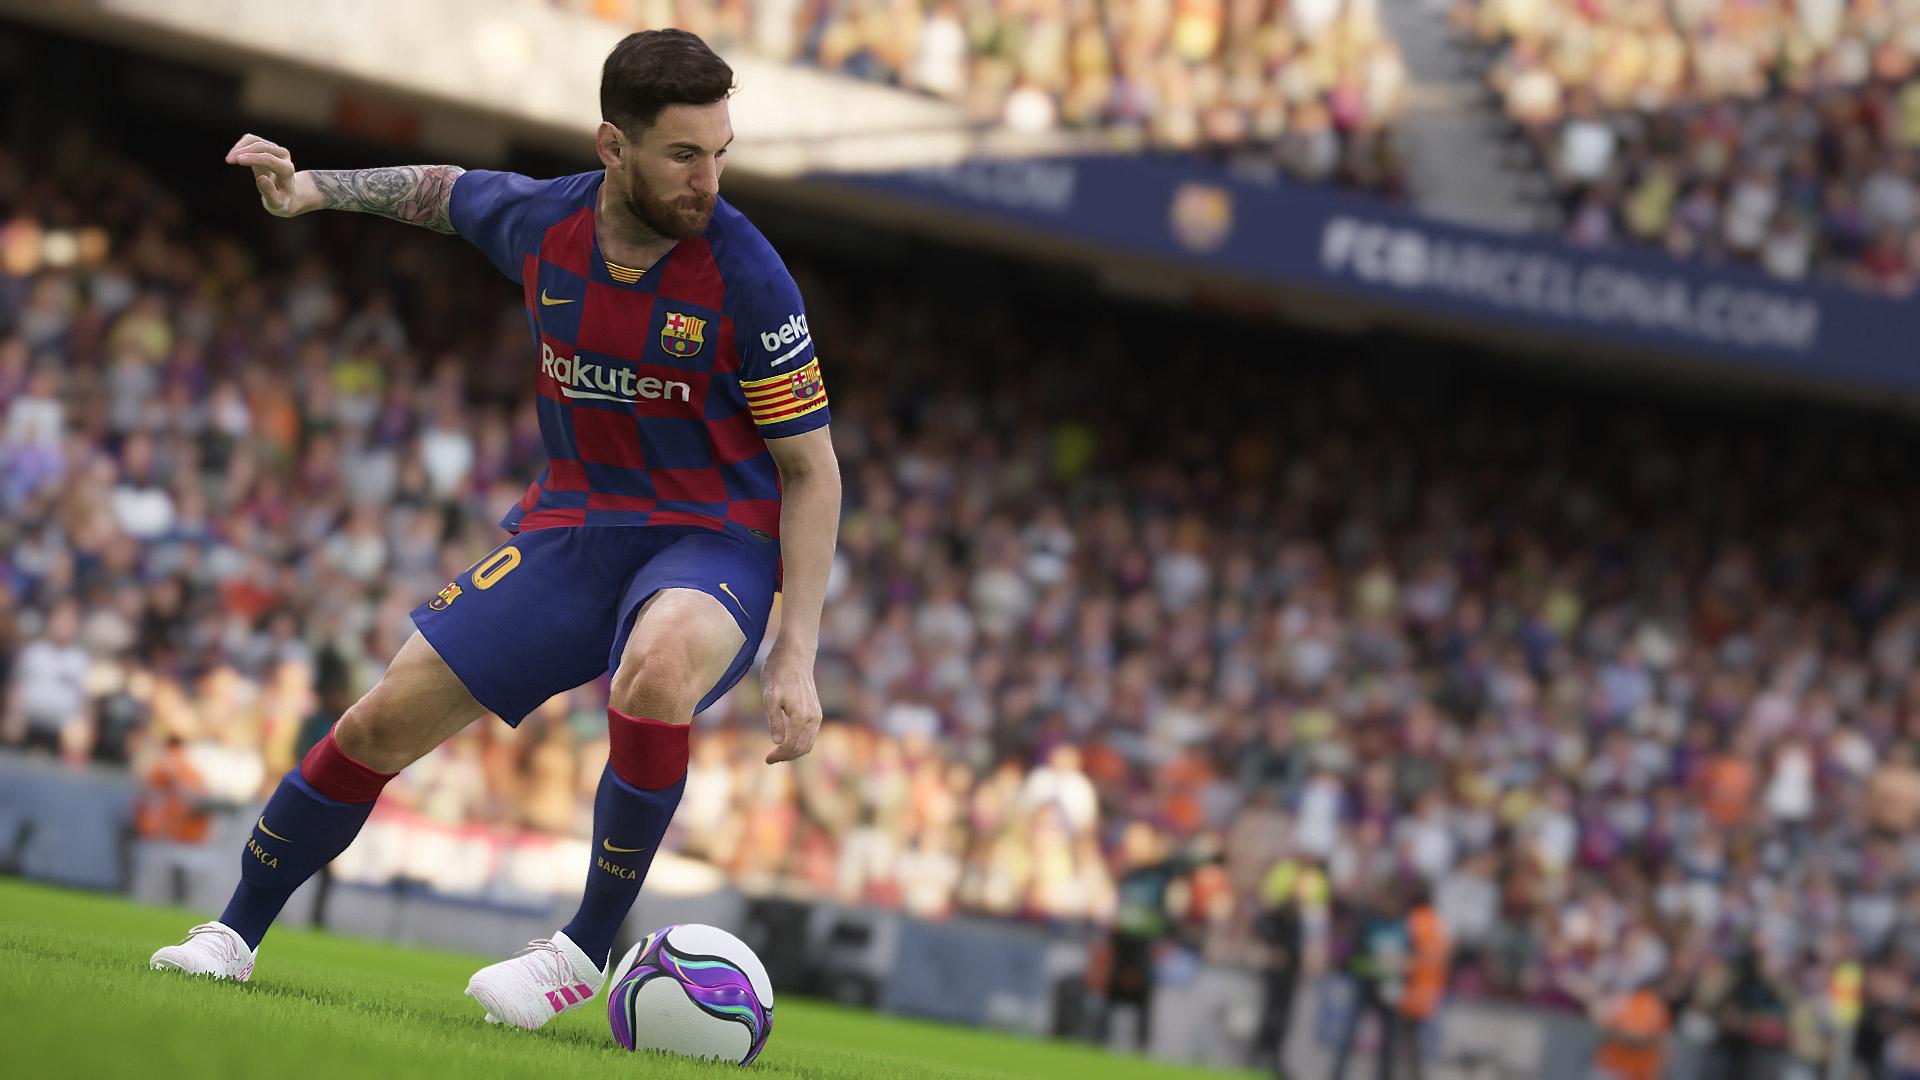 eFootball PES 2020 Demo Arrives on July 30th